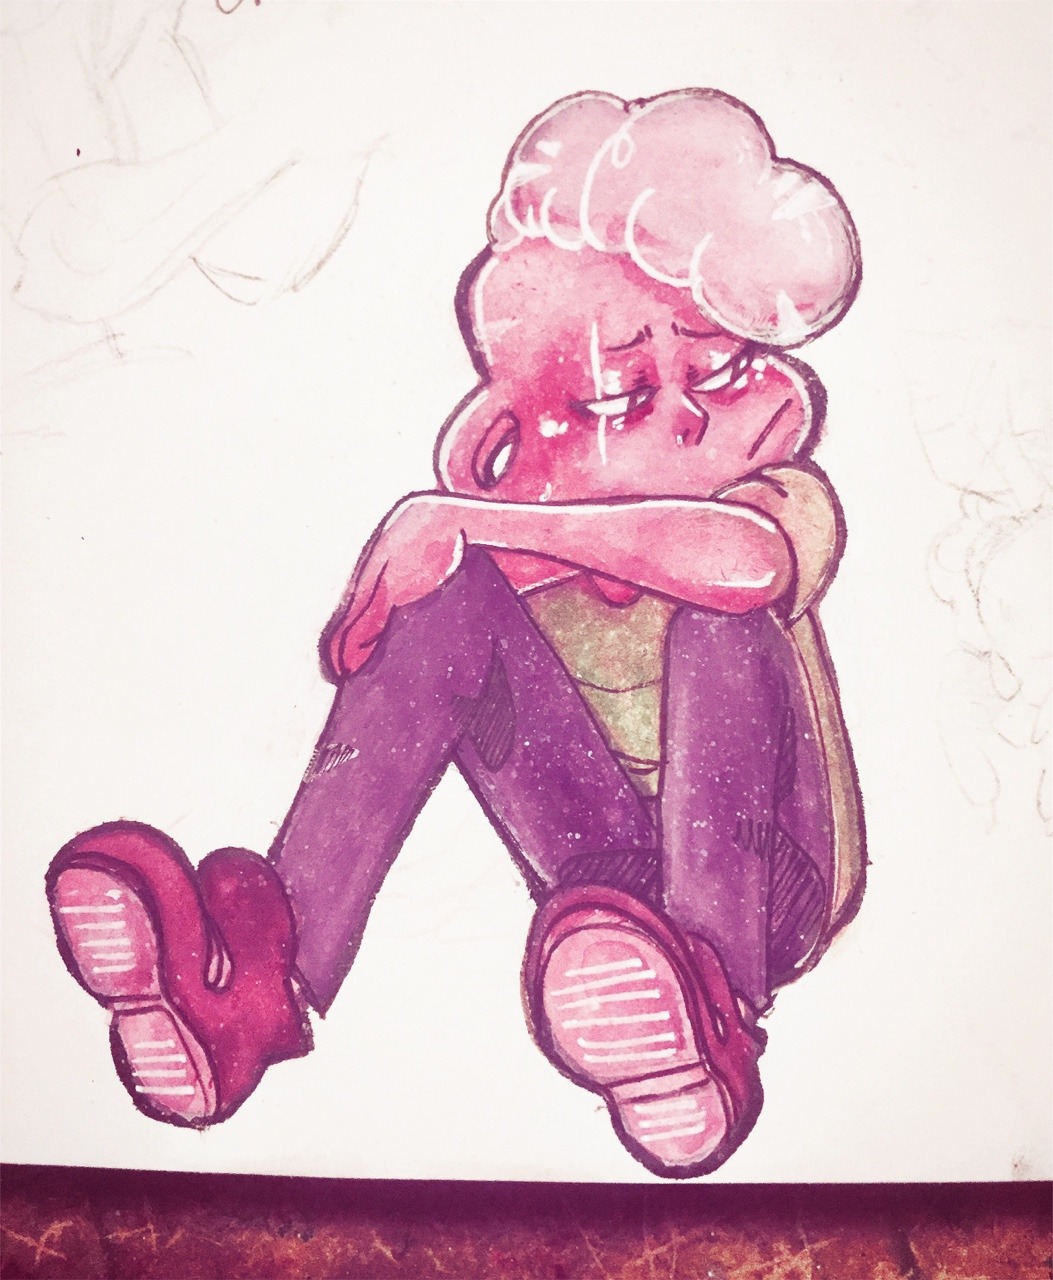 💕 I LOVE MY PINK ANXIOUS SON 💕